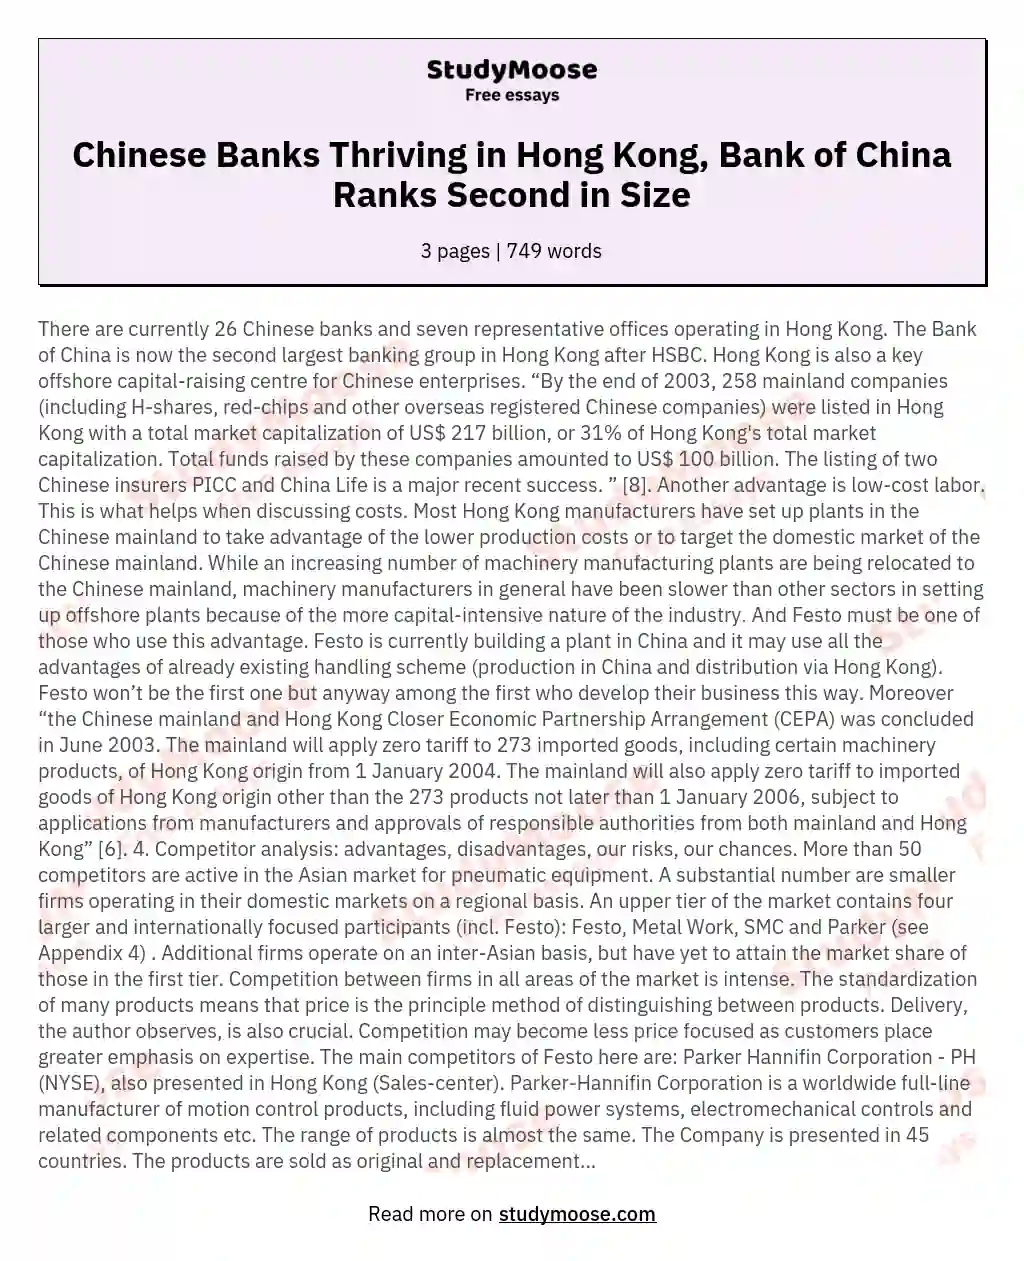 Chinese Banks Thriving in Hong Kong, Bank of China Ranks Second in Size essay